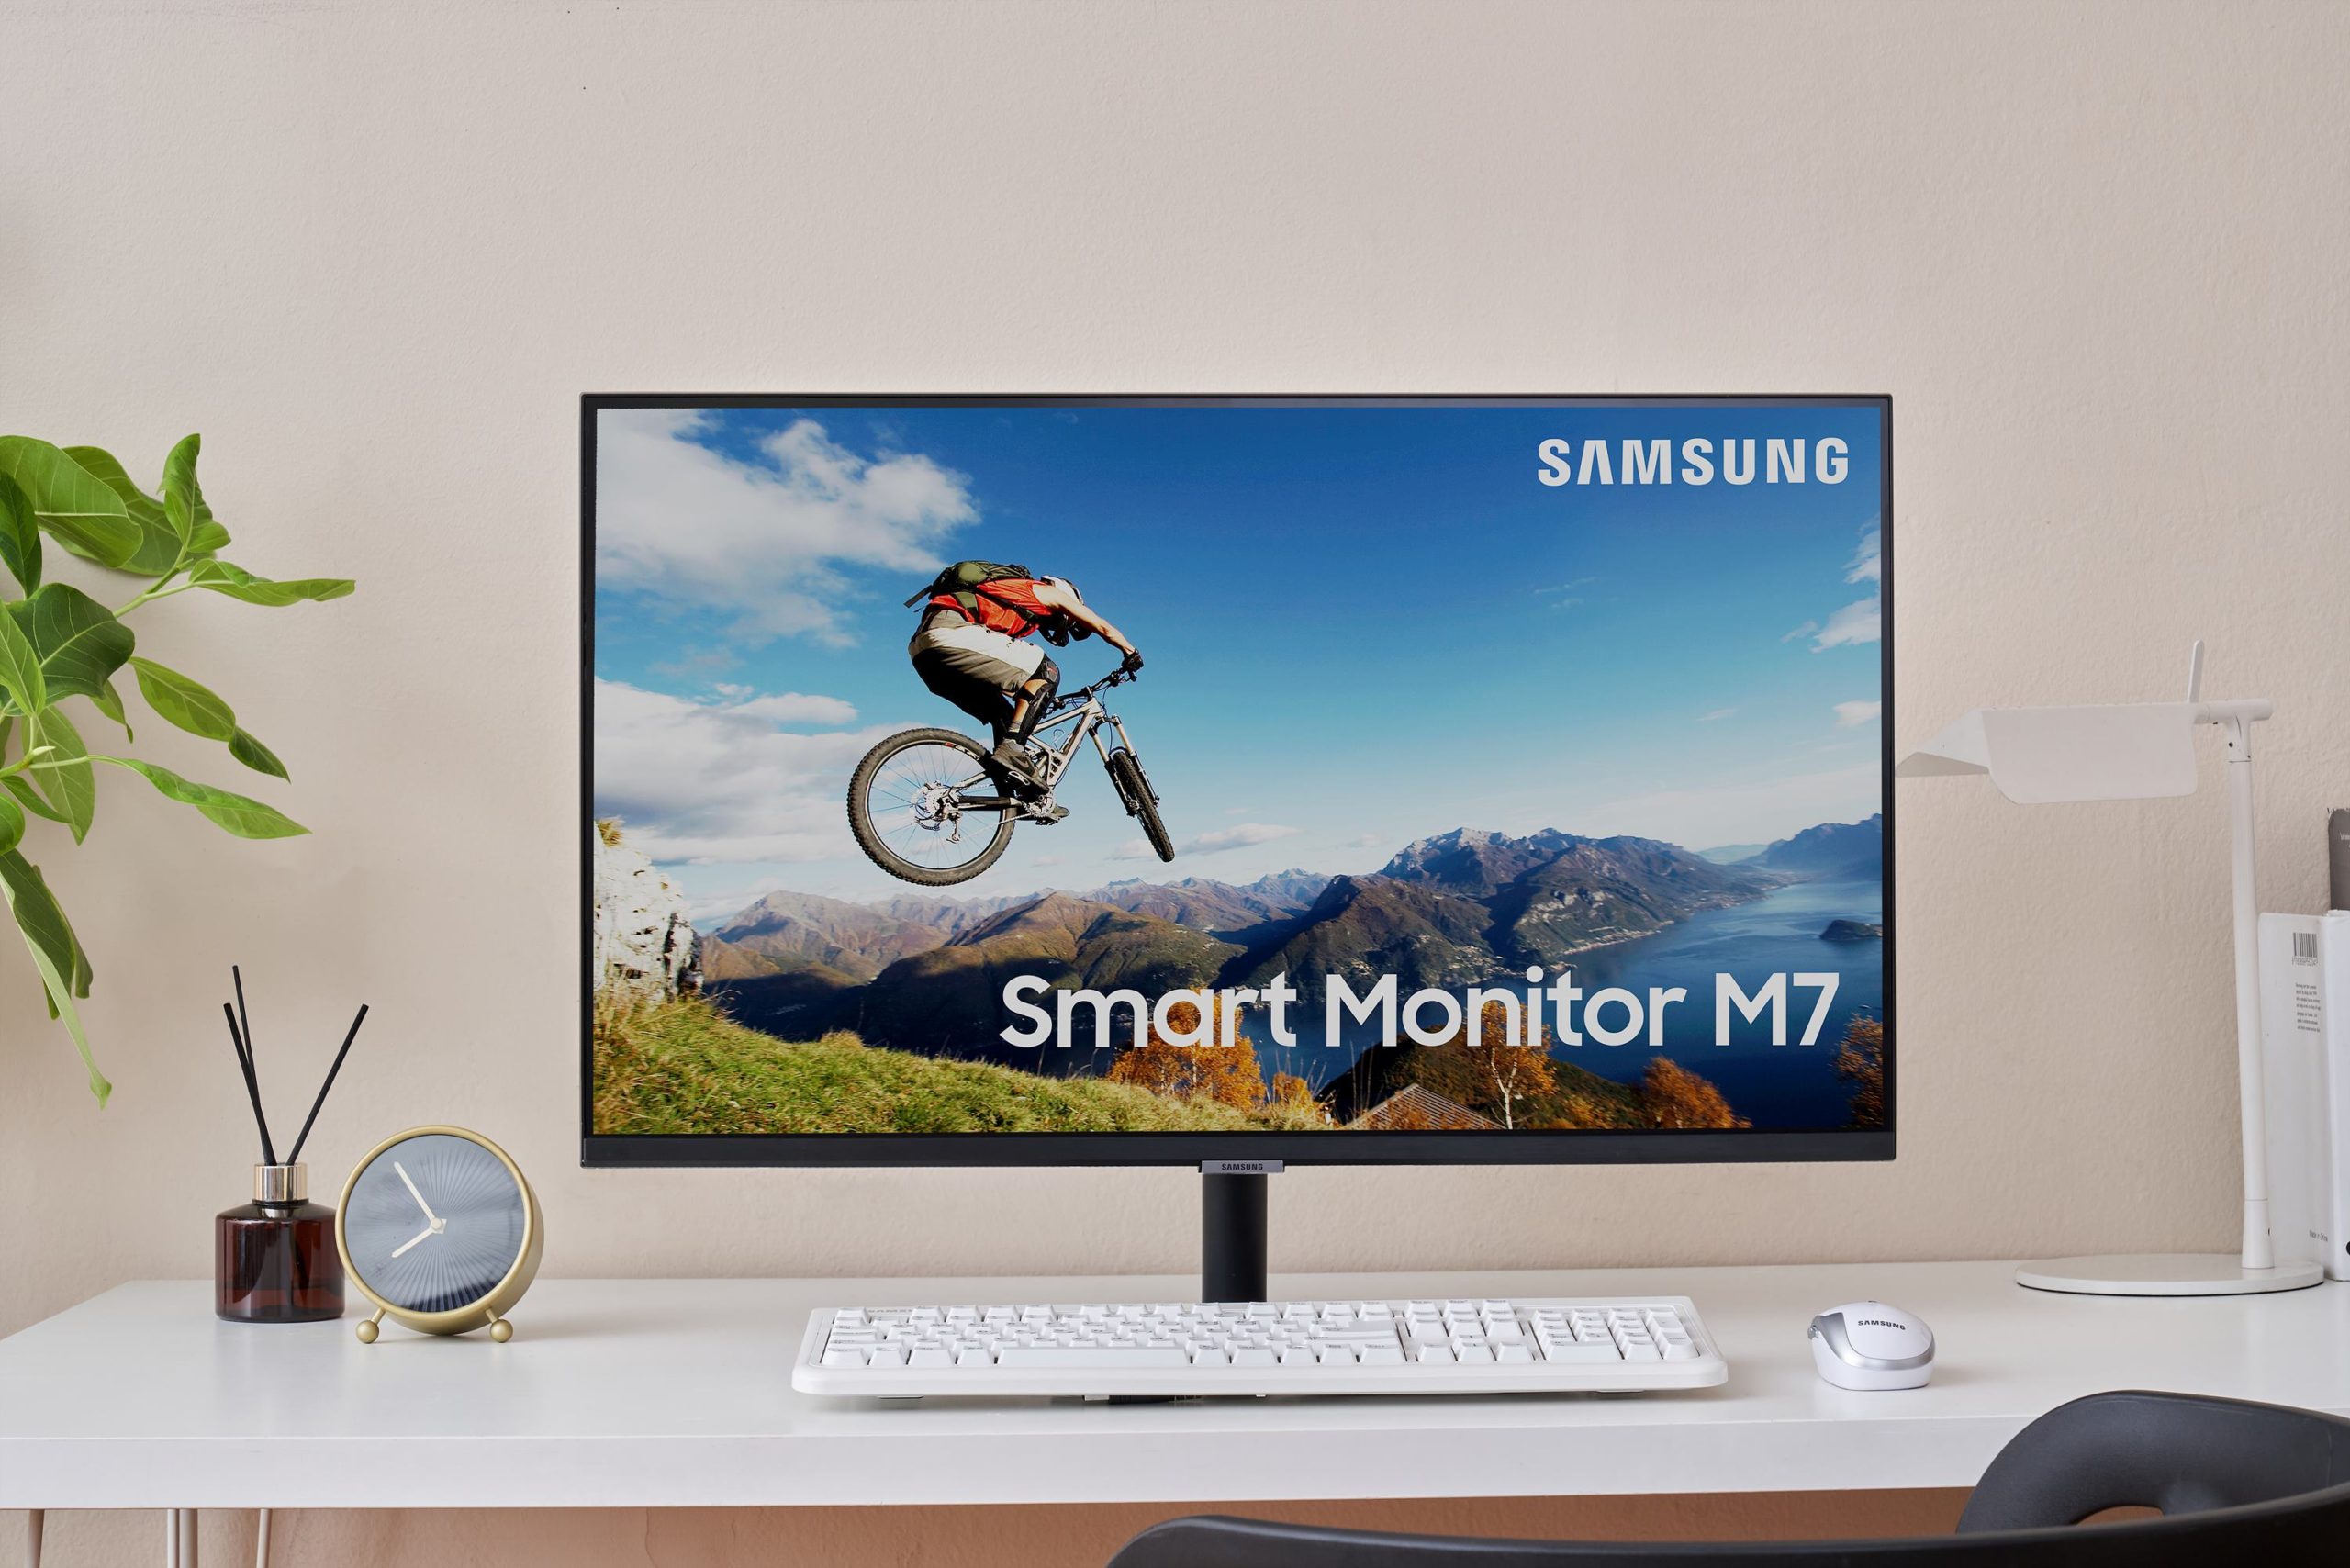 Samsung launches two monitor models that have Smart TV abilities